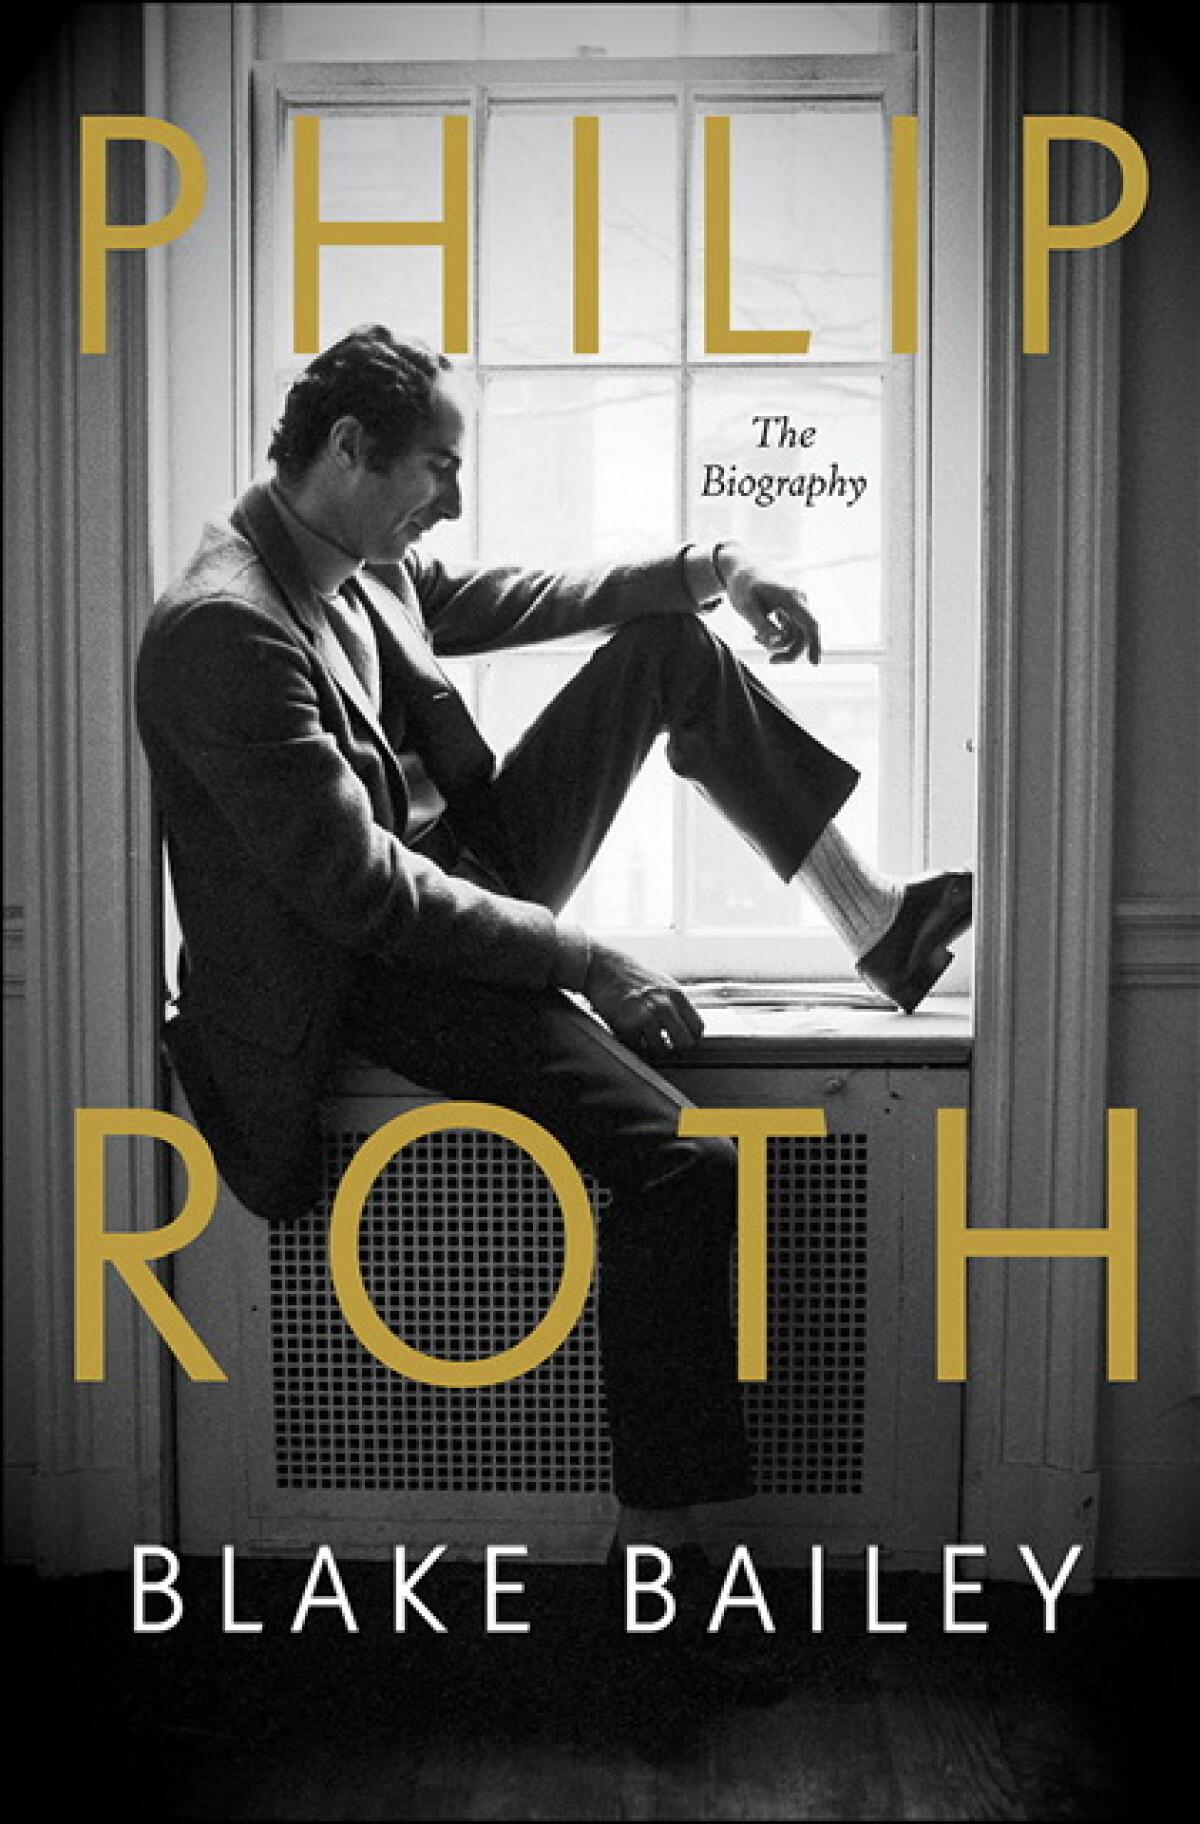 The book jacket for “Philip Roth: The Biography” by Blake Bailey